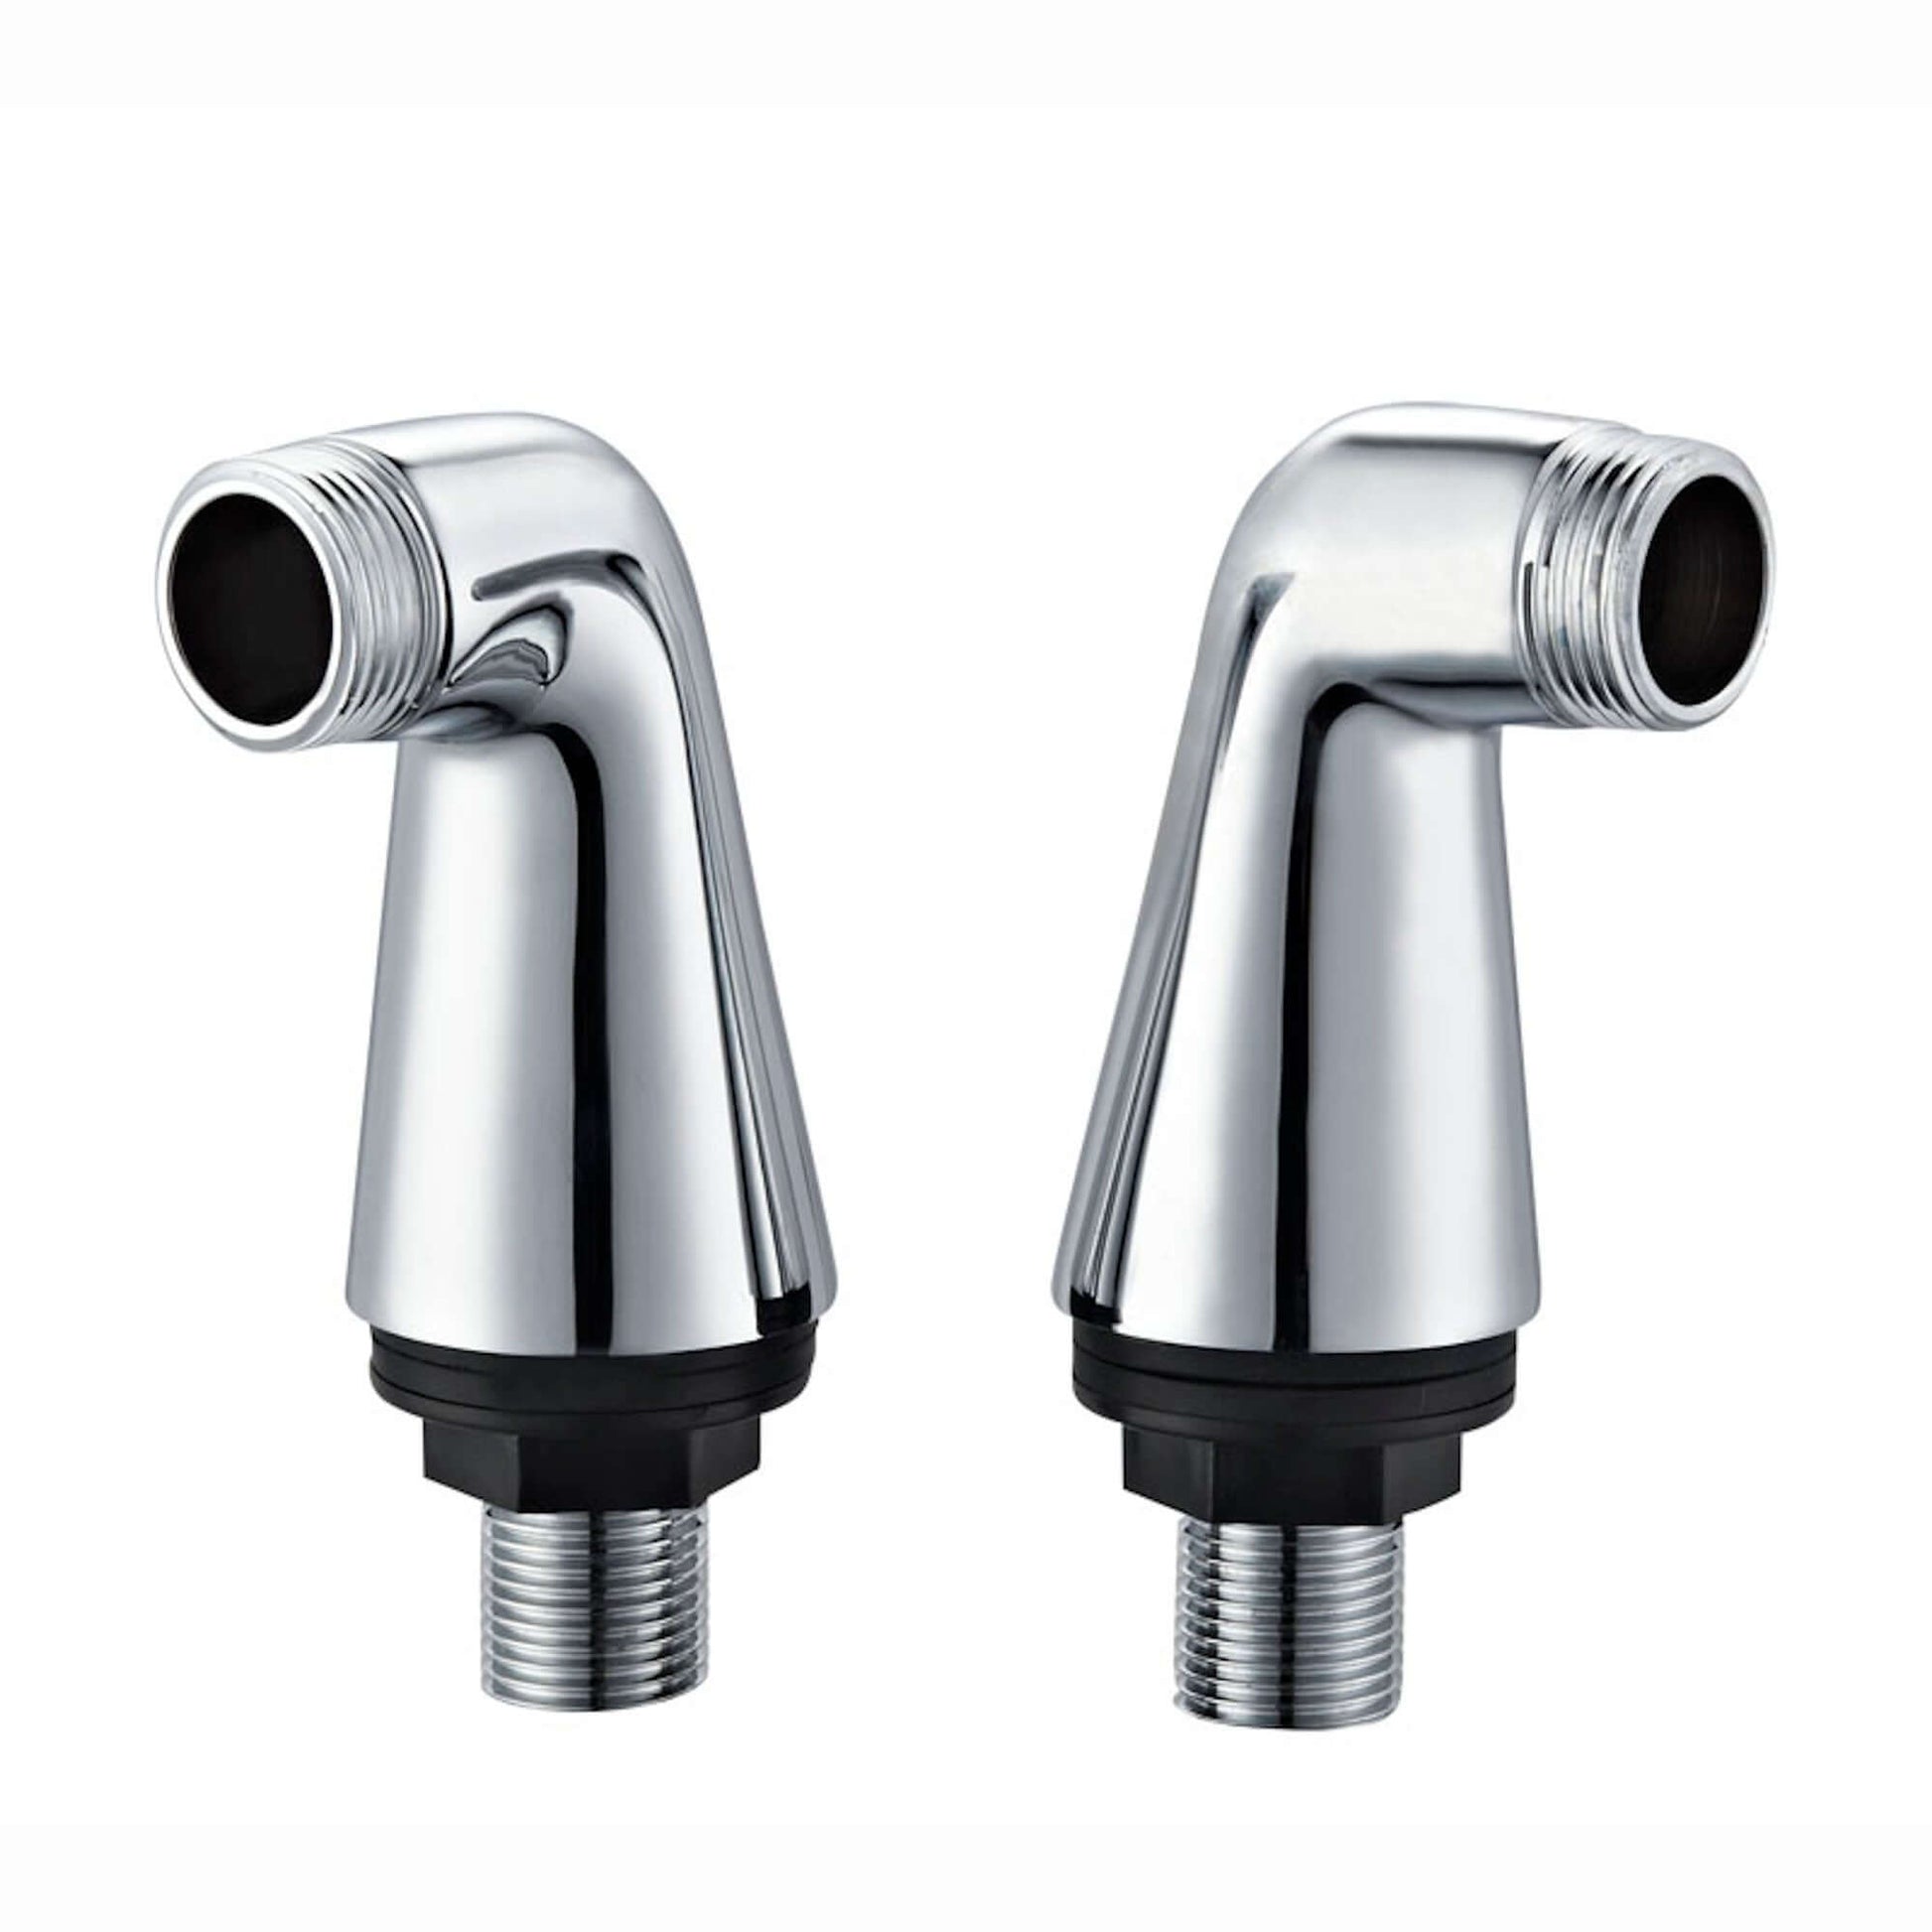 Pair of standard bath tap legs for deck mounting - chrome - Taps